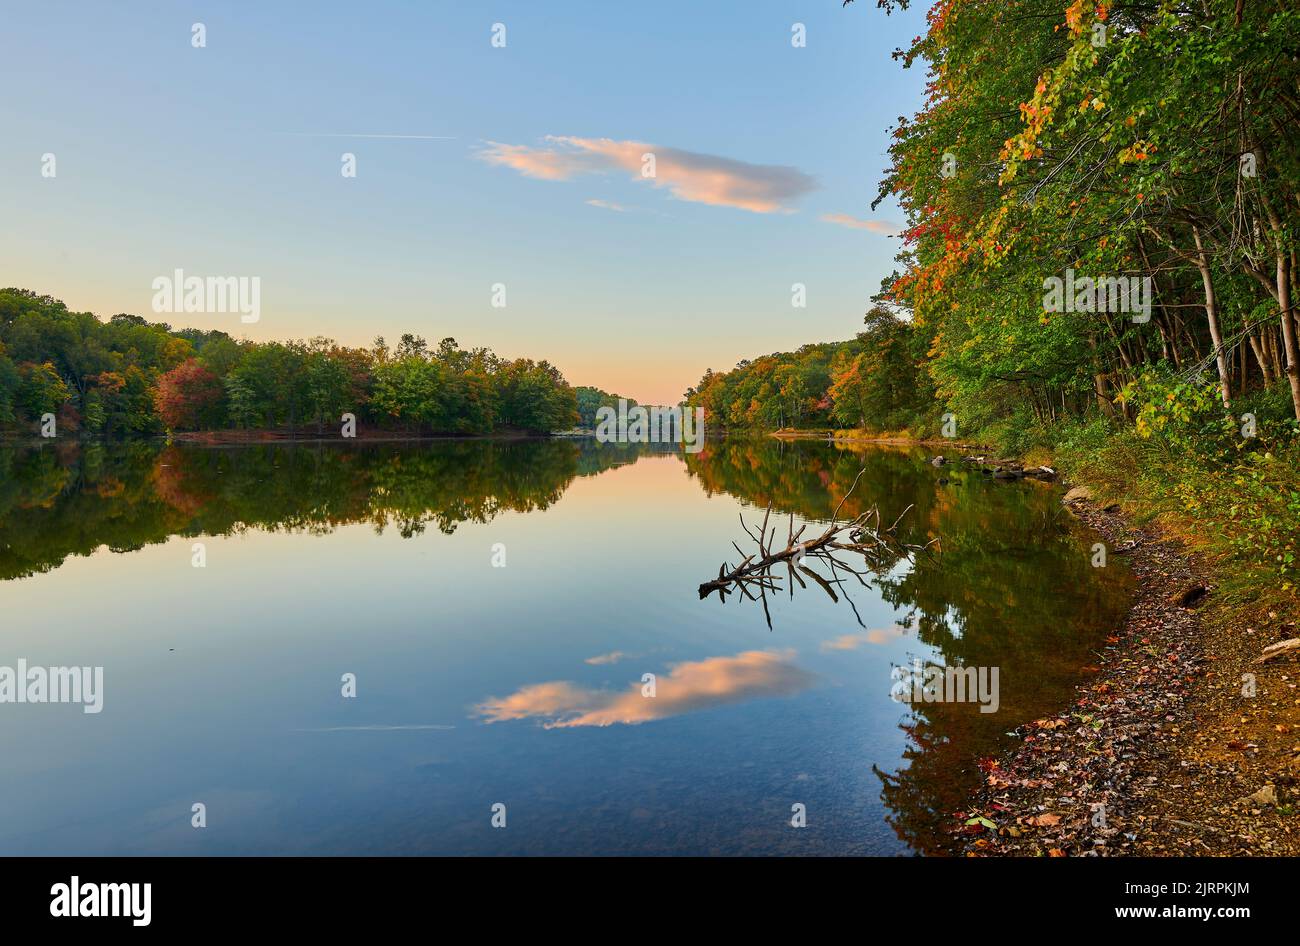 Peaceful evening in the park on lake Needwood Stock Photo